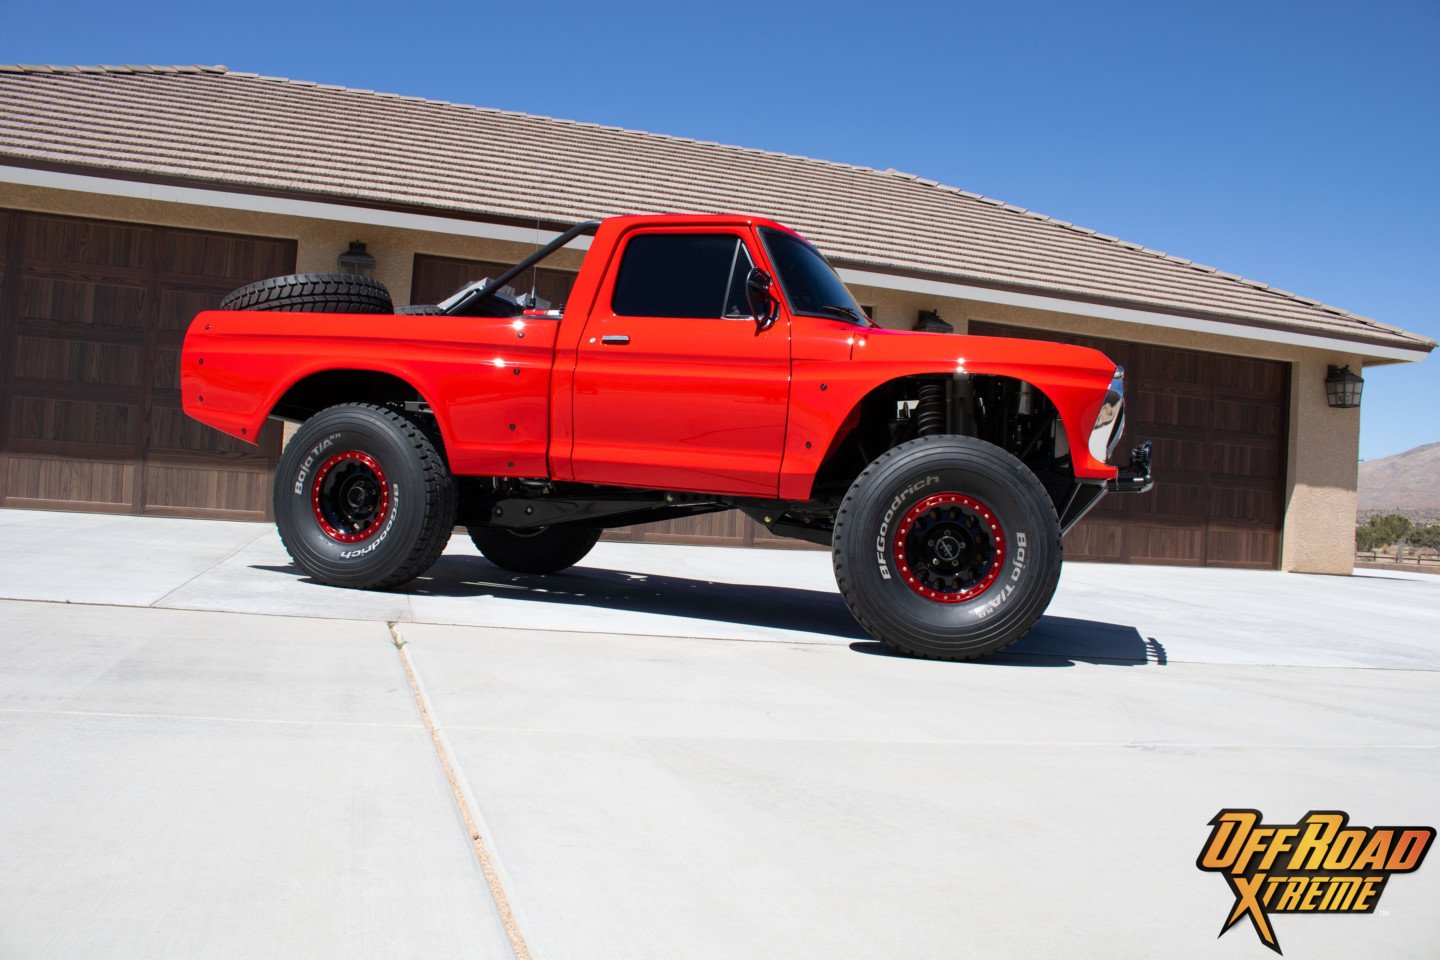 Vehicle Feature Spotlight: Mike Linares 1977 F100 PreRunner